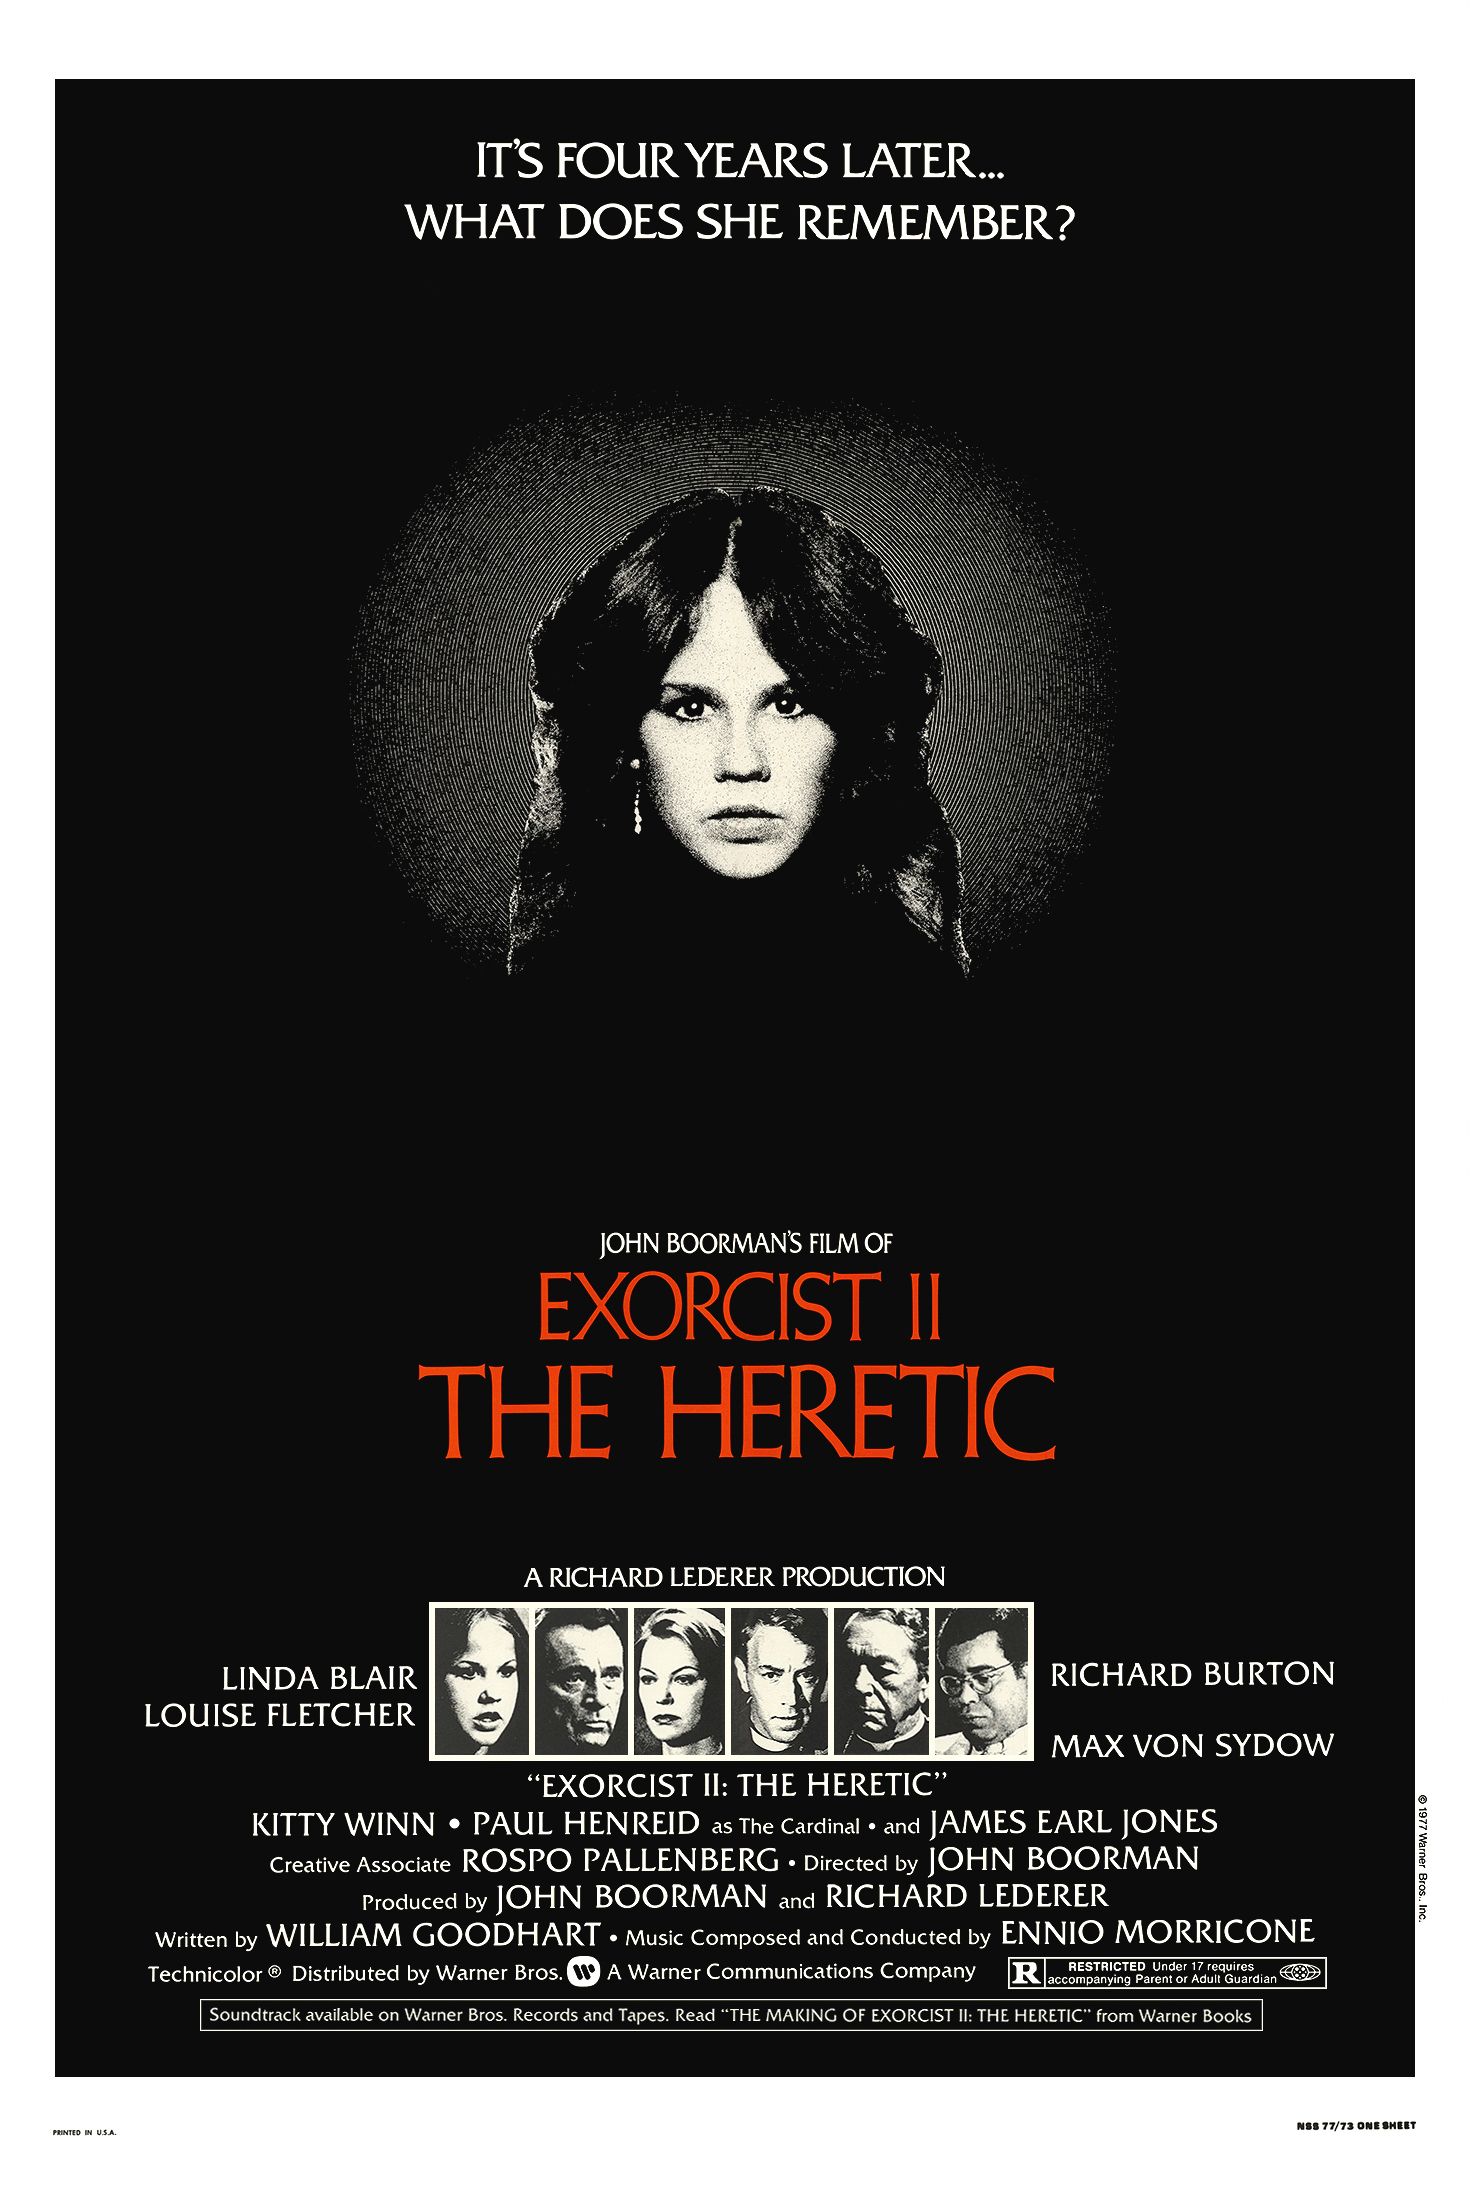 The Exorcist II The Heretic Poster 1977